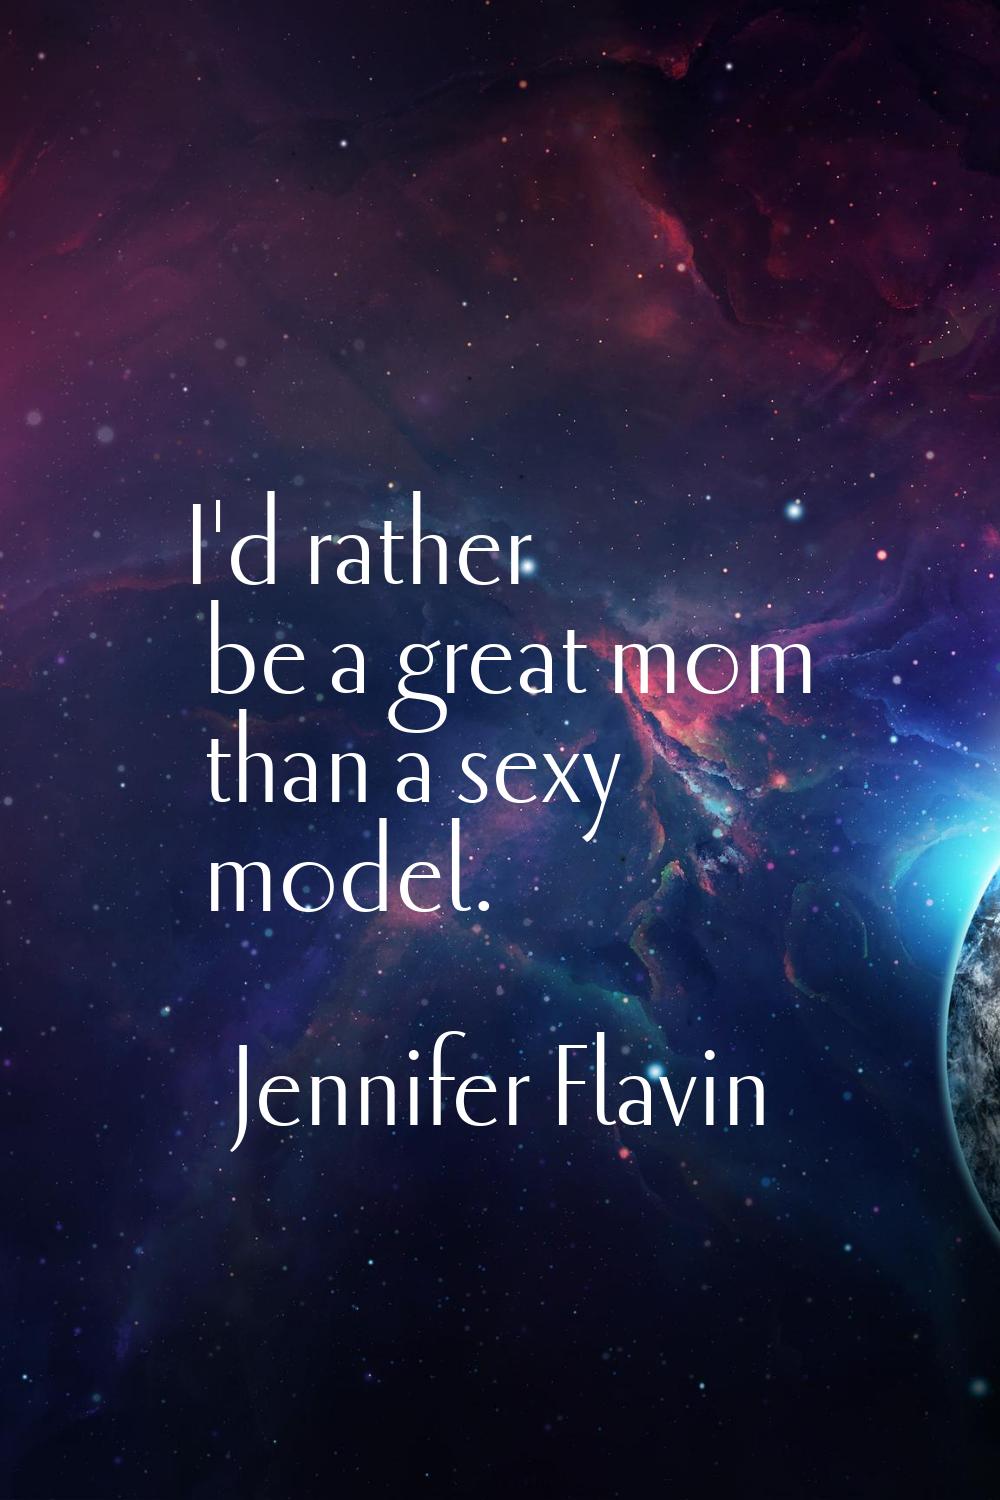 I'd rather be a great mom than a sexy model.